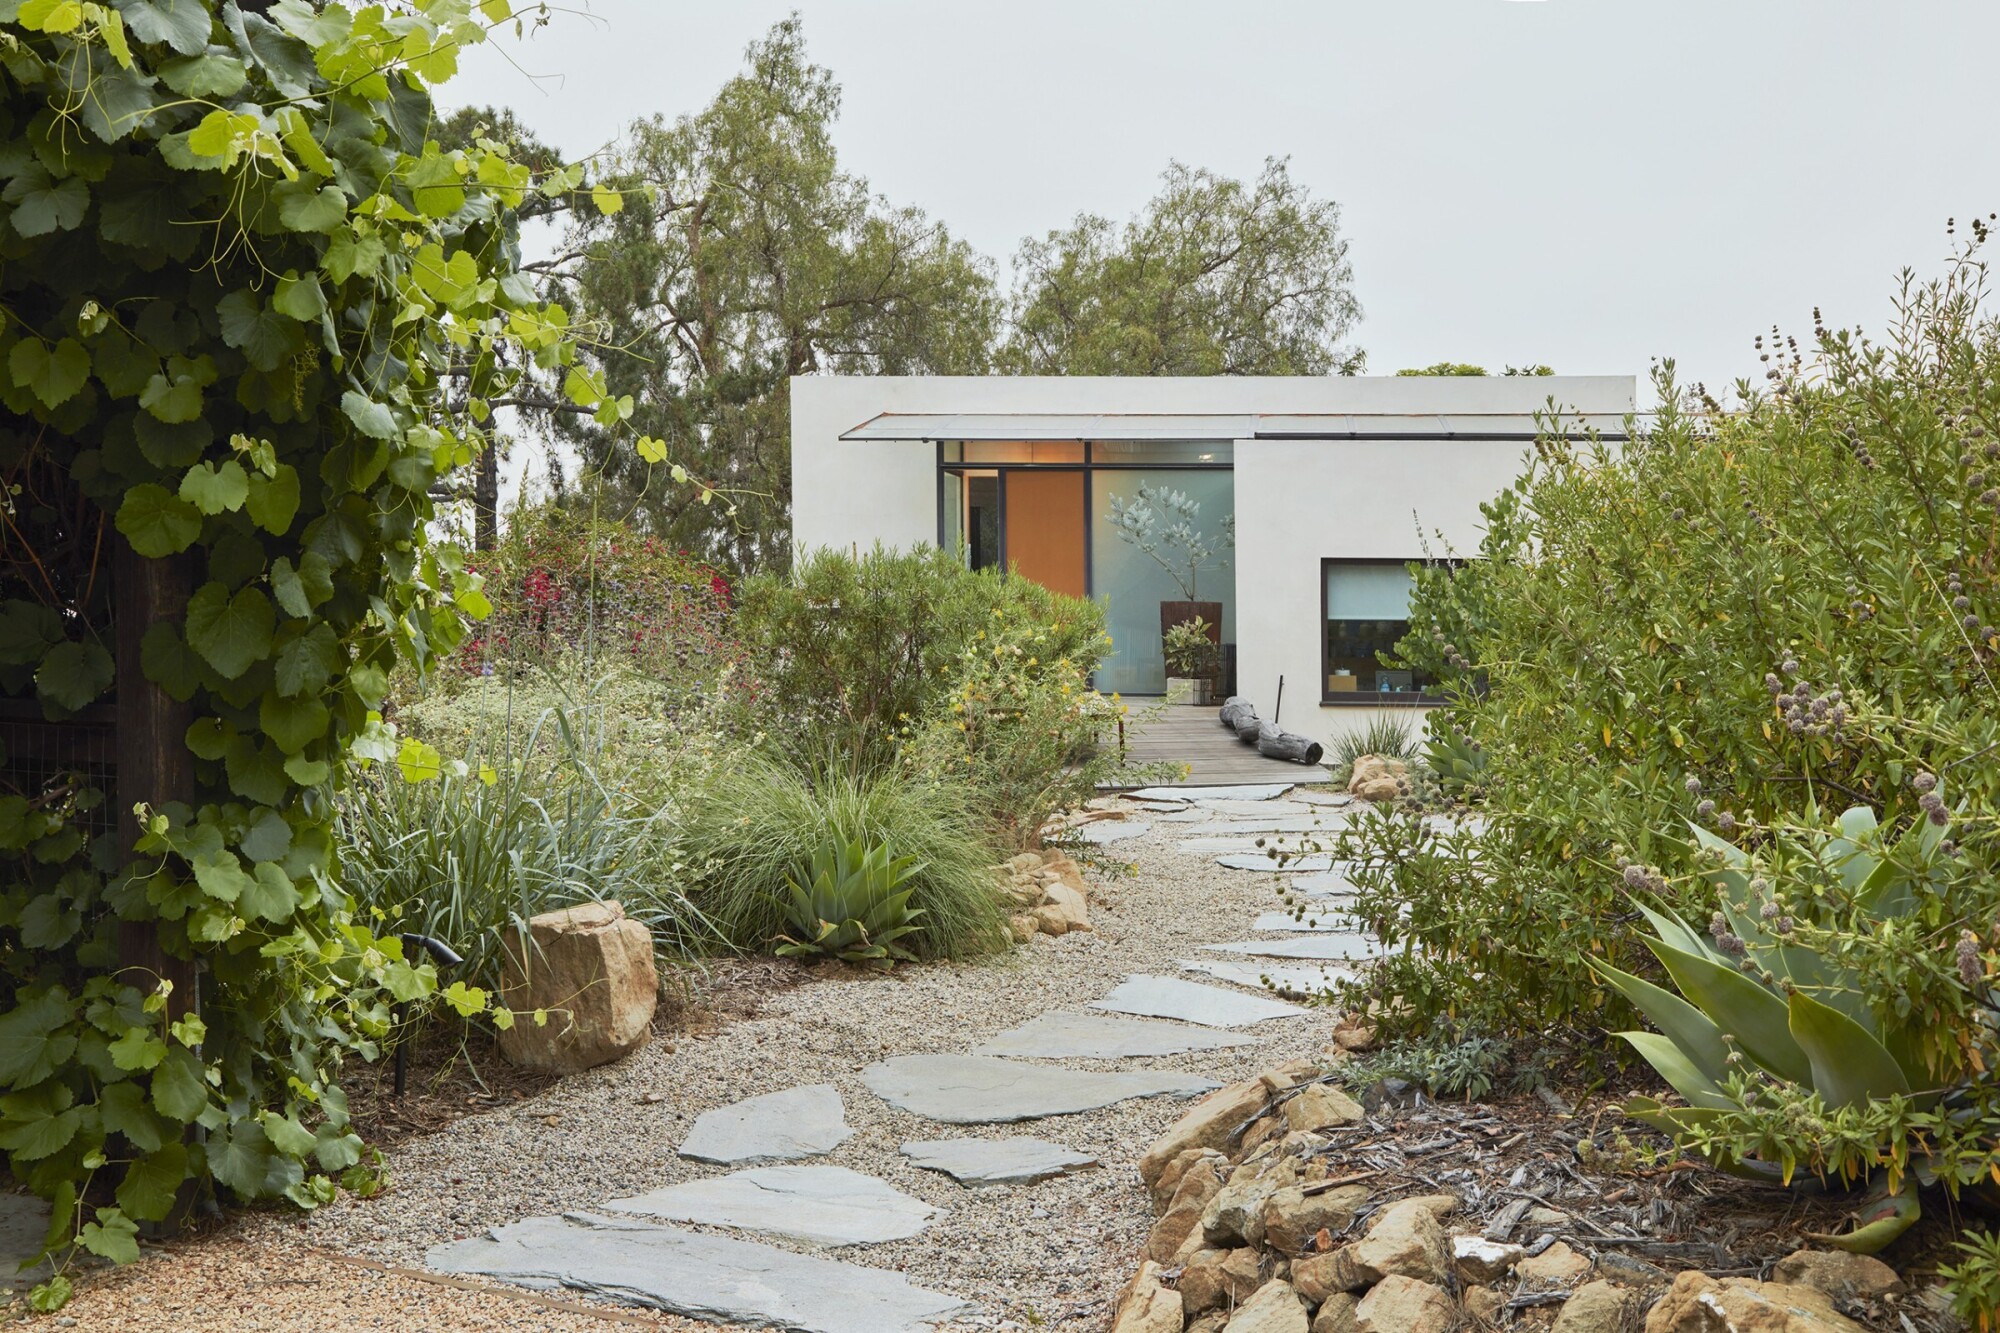 Native plants line a stone walkway in front of a house